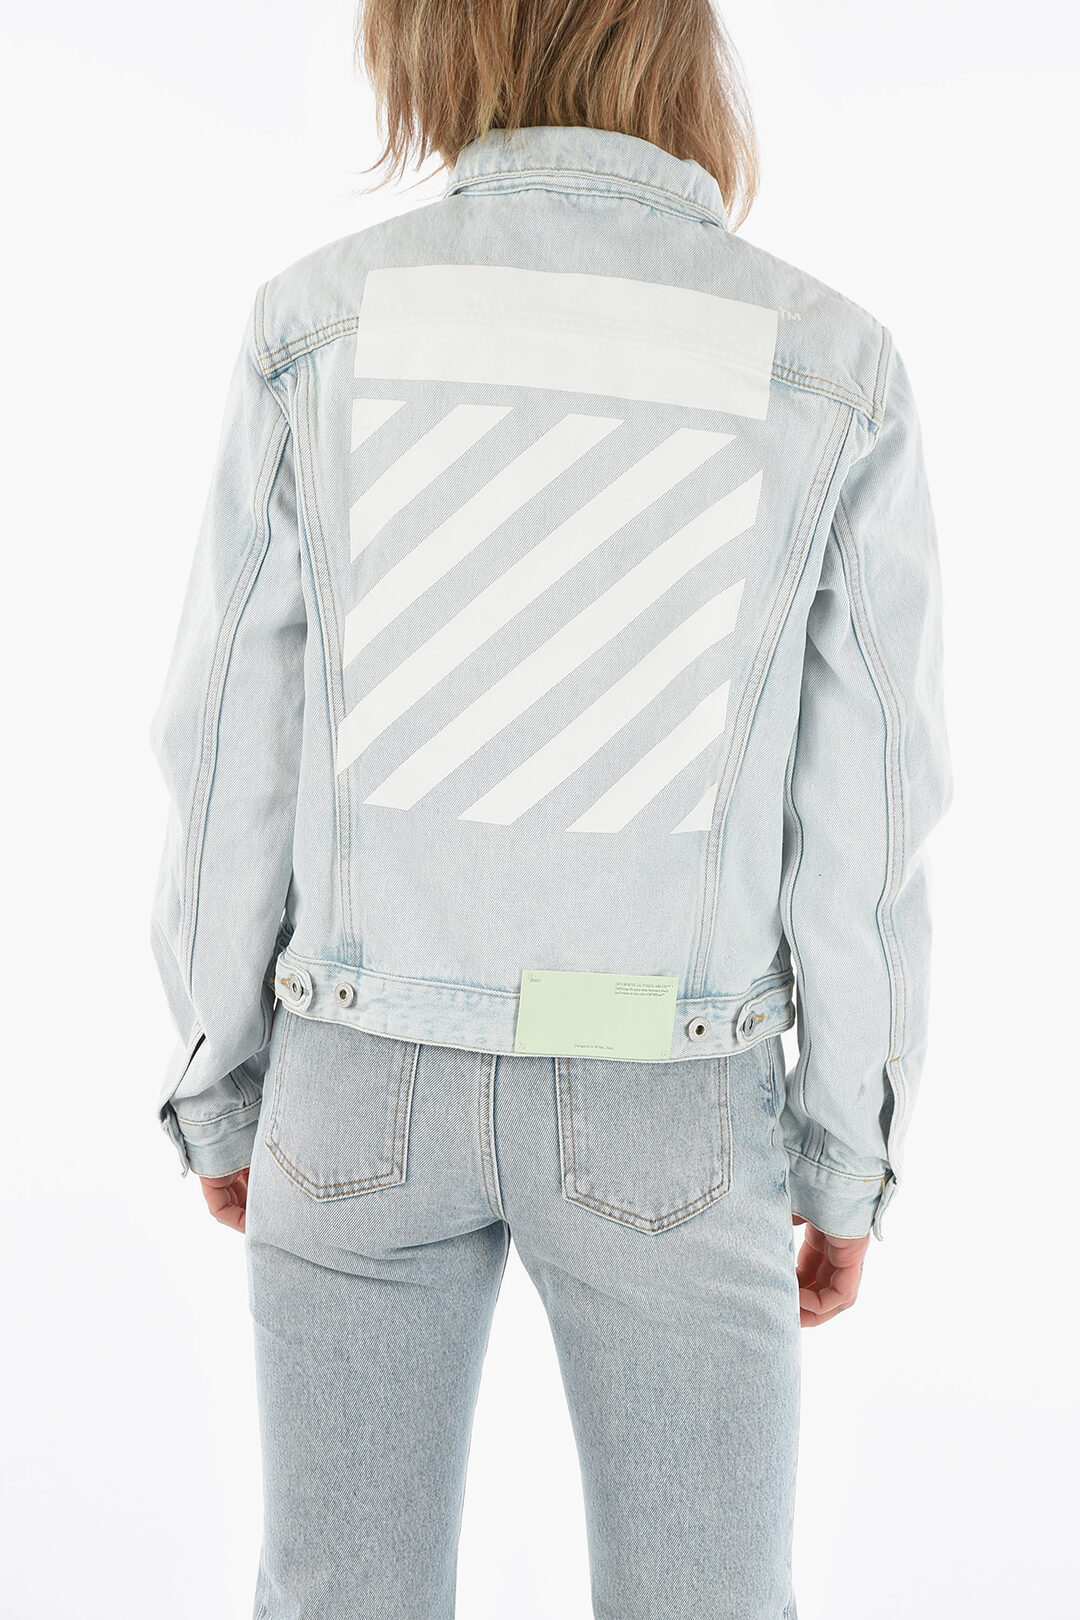 Off-White Off-White X Levi's Made &Amp; Crafted Colour Block Denim...  ($1,143) ❤ liked on Polyvore featur… | White jacket women, Off white jacket,  White coat jacket